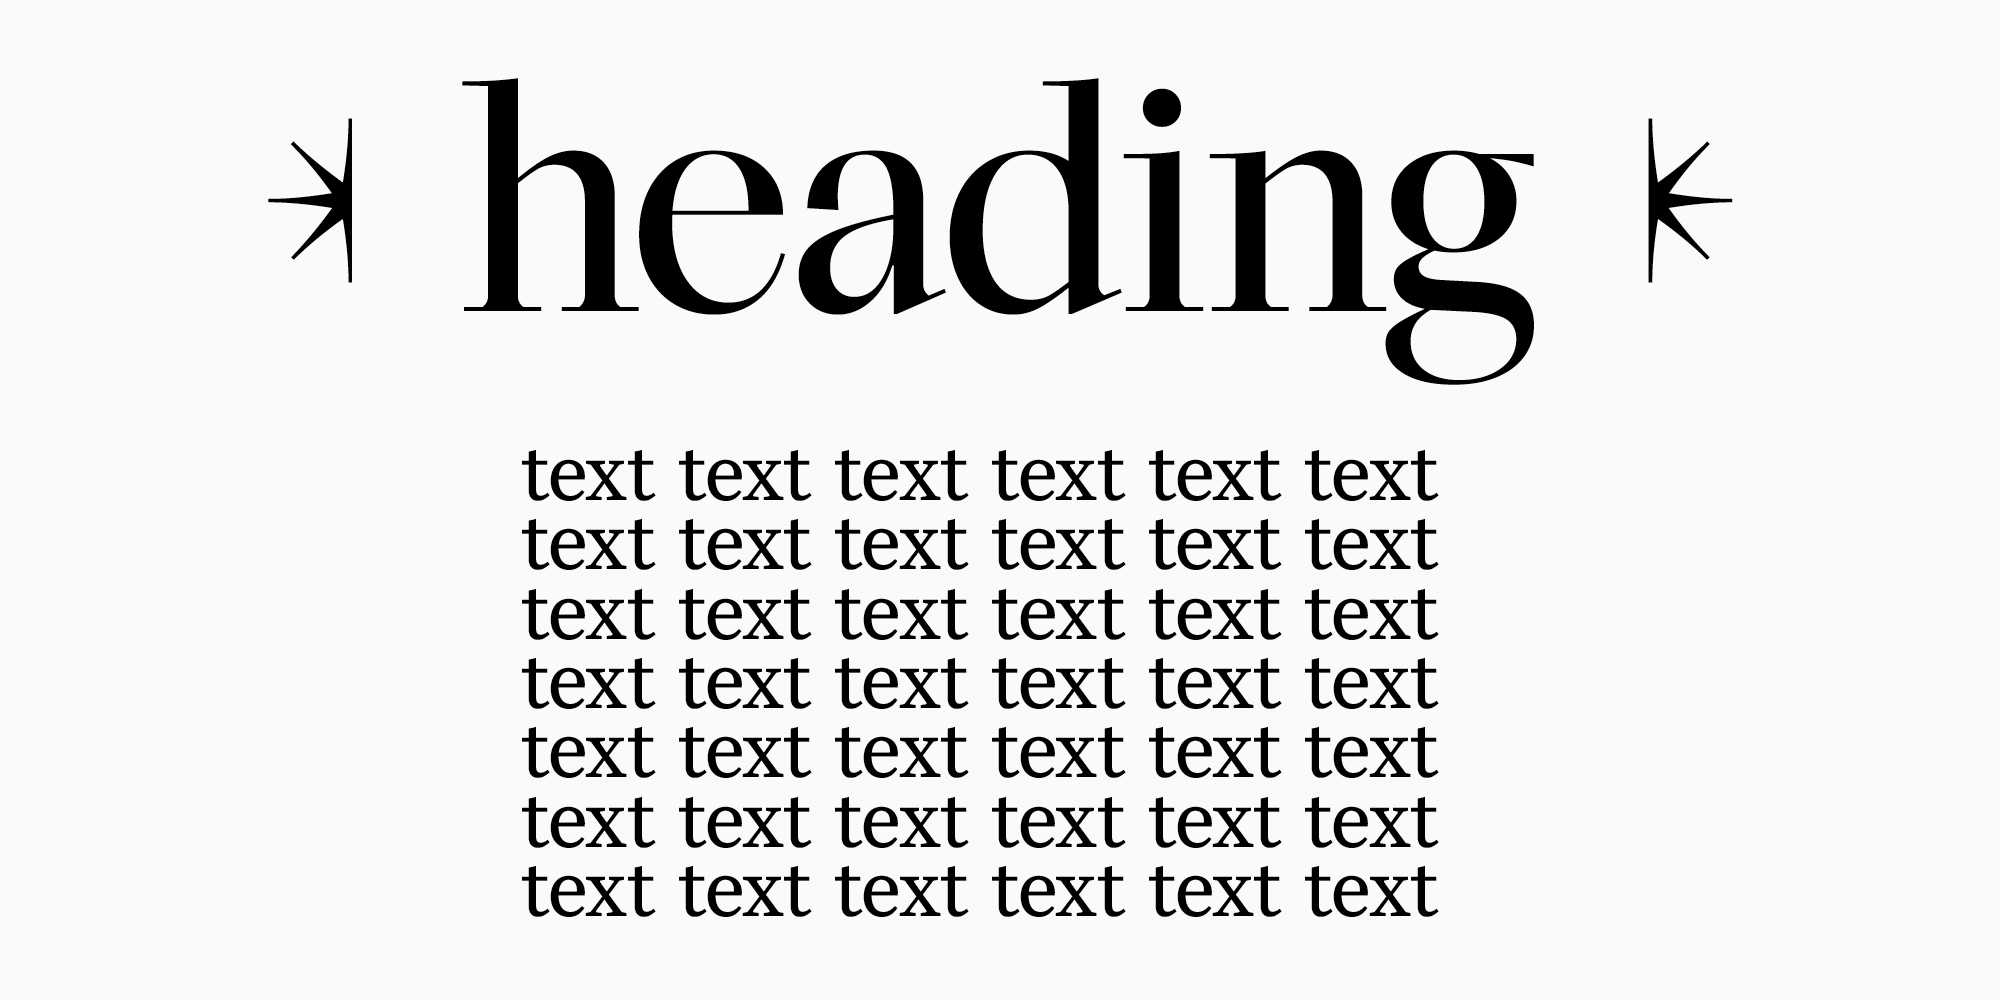 At First Sight: Stylish Fonts for Headlines and Displays